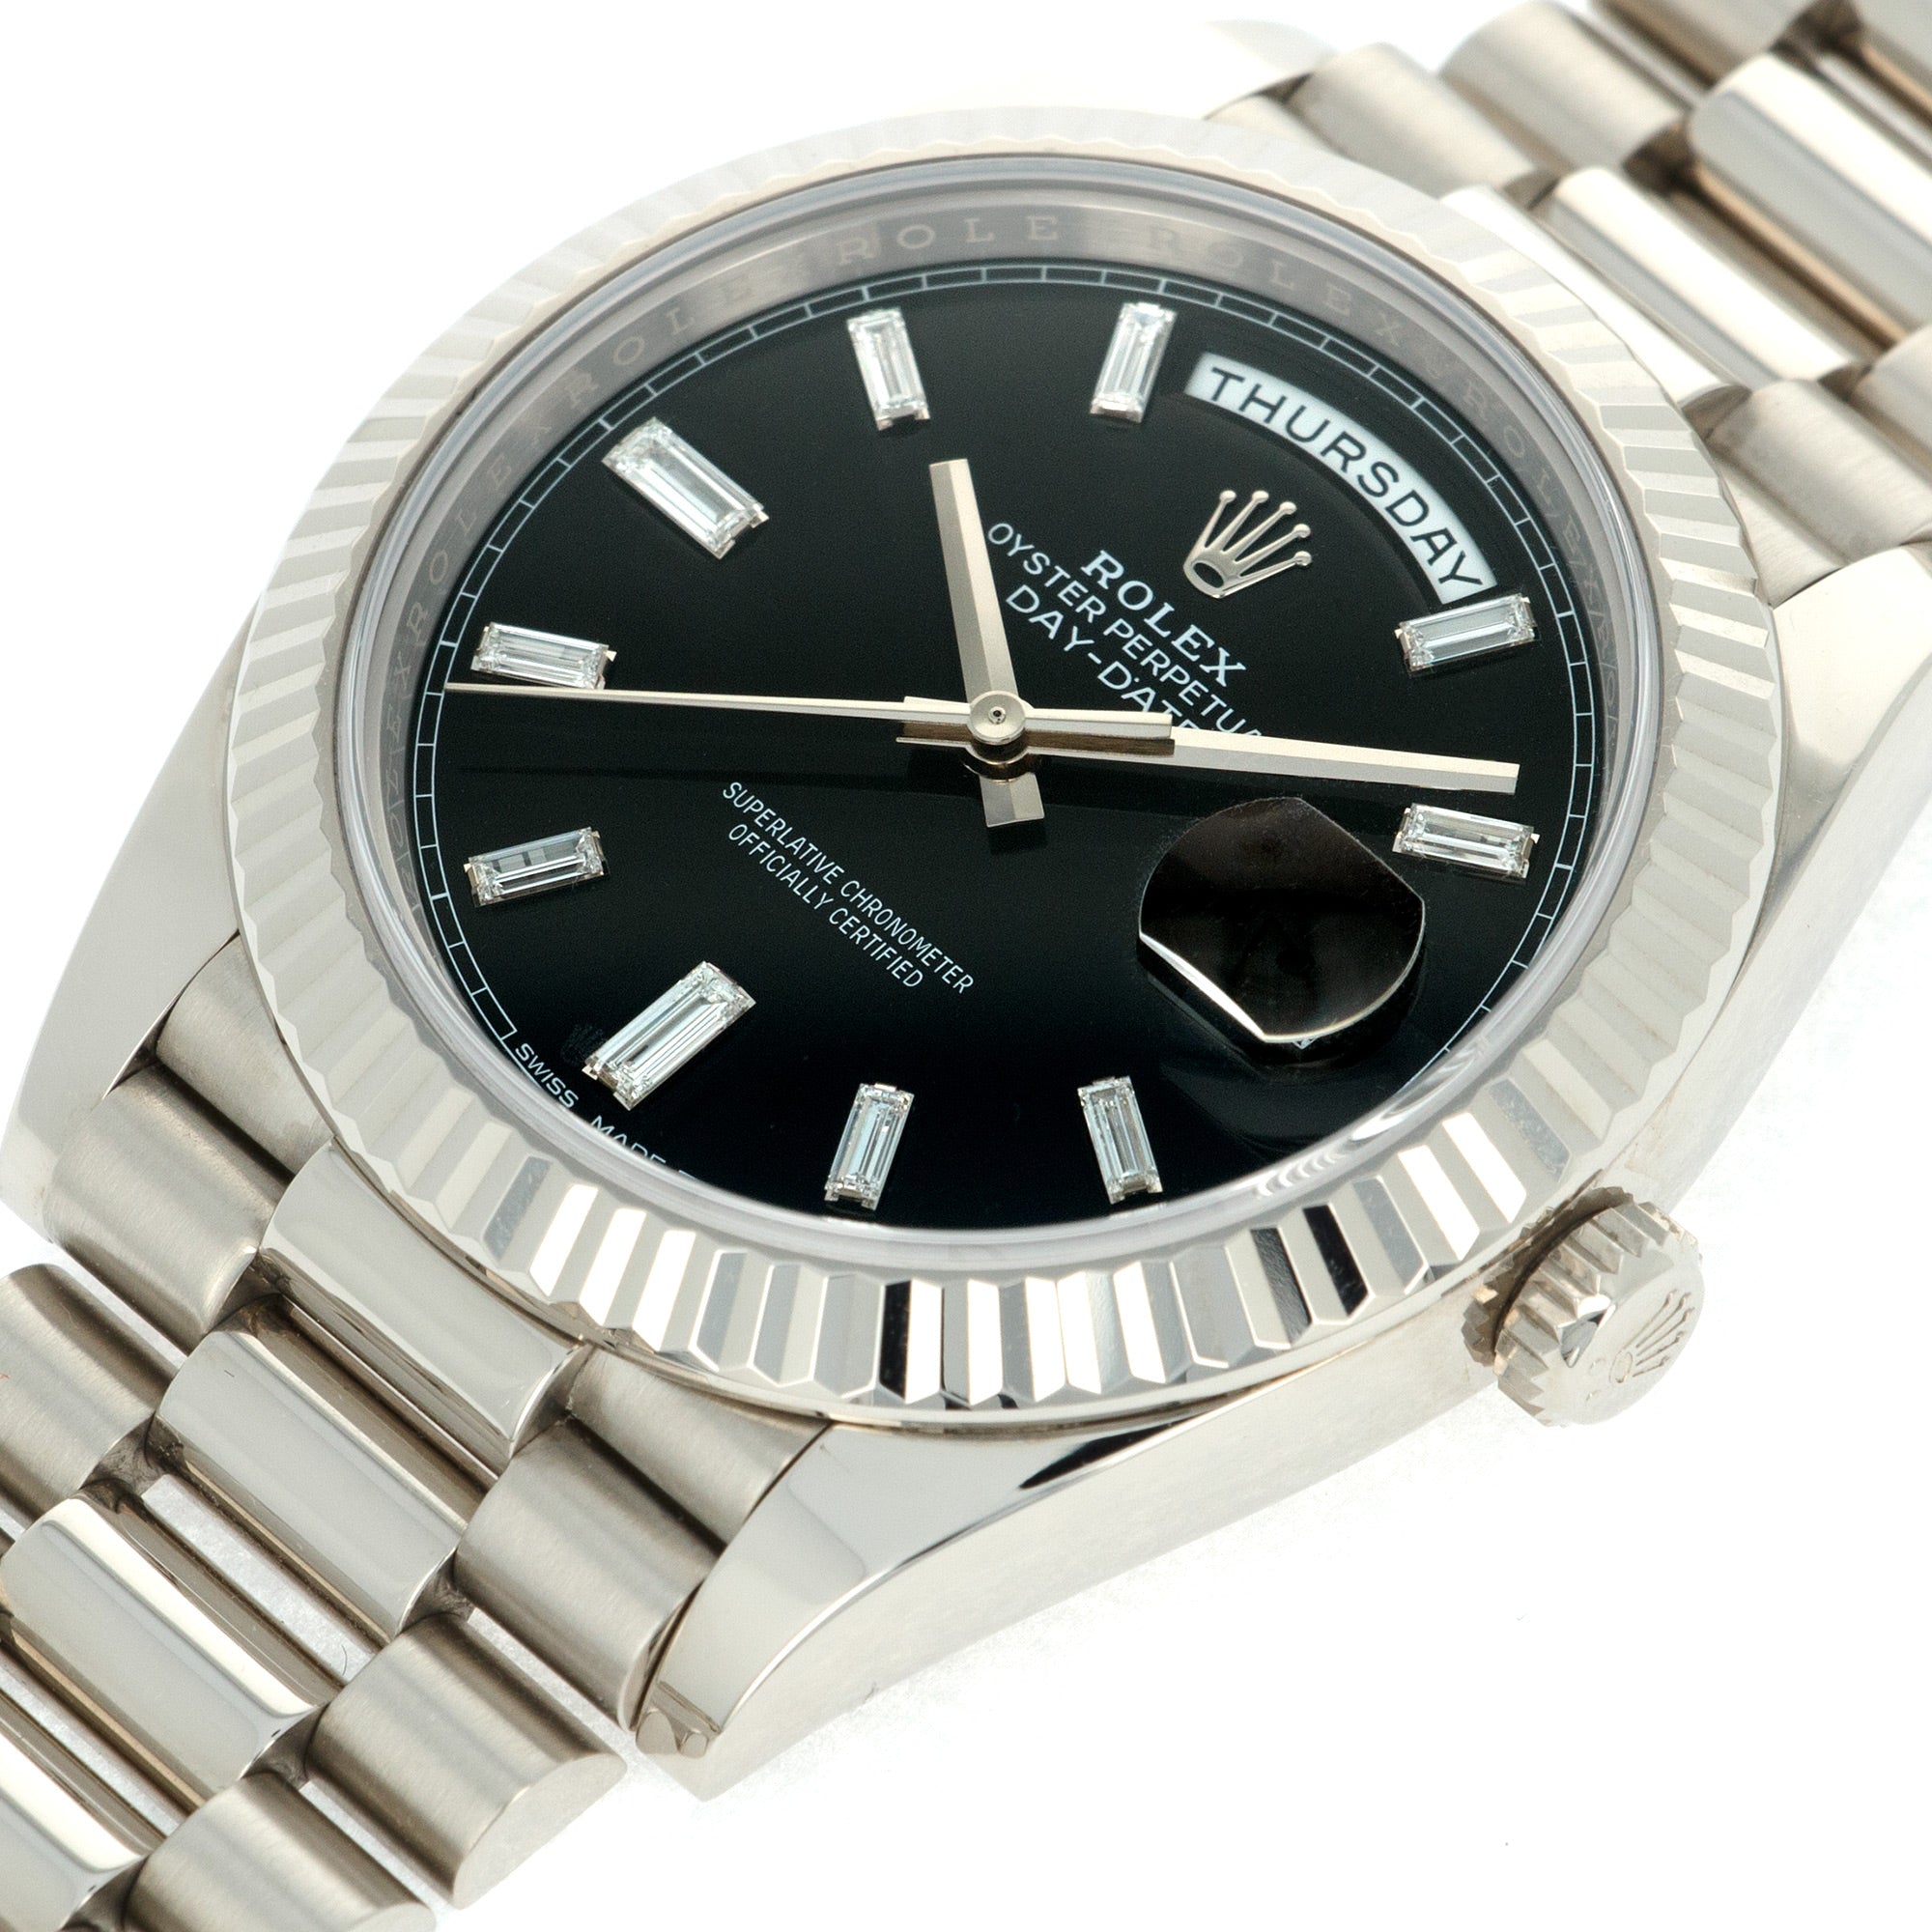 Rolex - Rolex Day-Date white gold baguette diamond dial ref. 228239 - The Keystone Watches